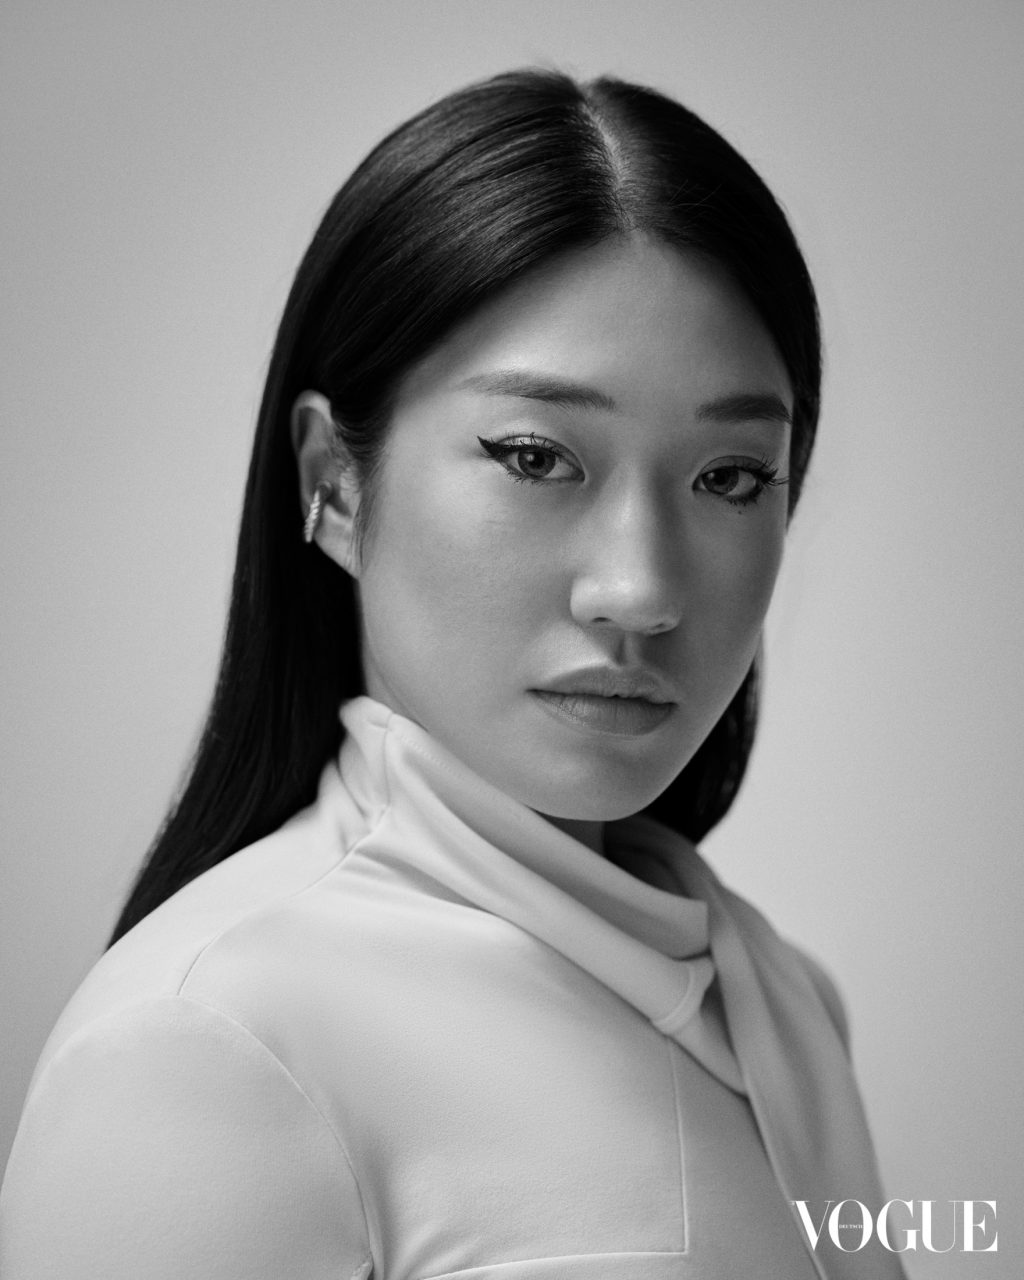 Peggy Gou's international education and her rise to fame